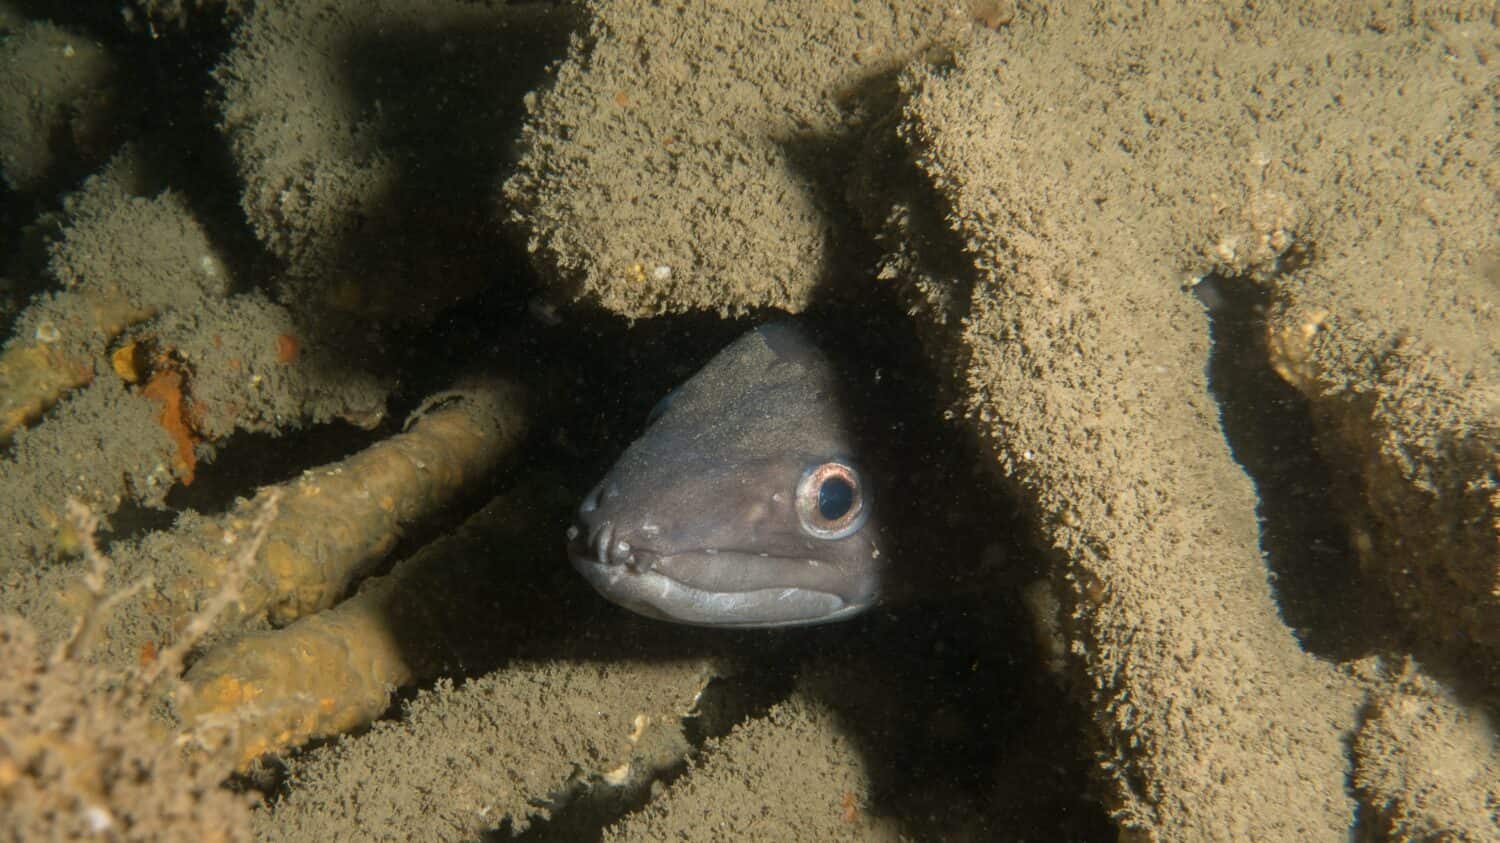 A conger eel pokes it's head out from behind some wreckage